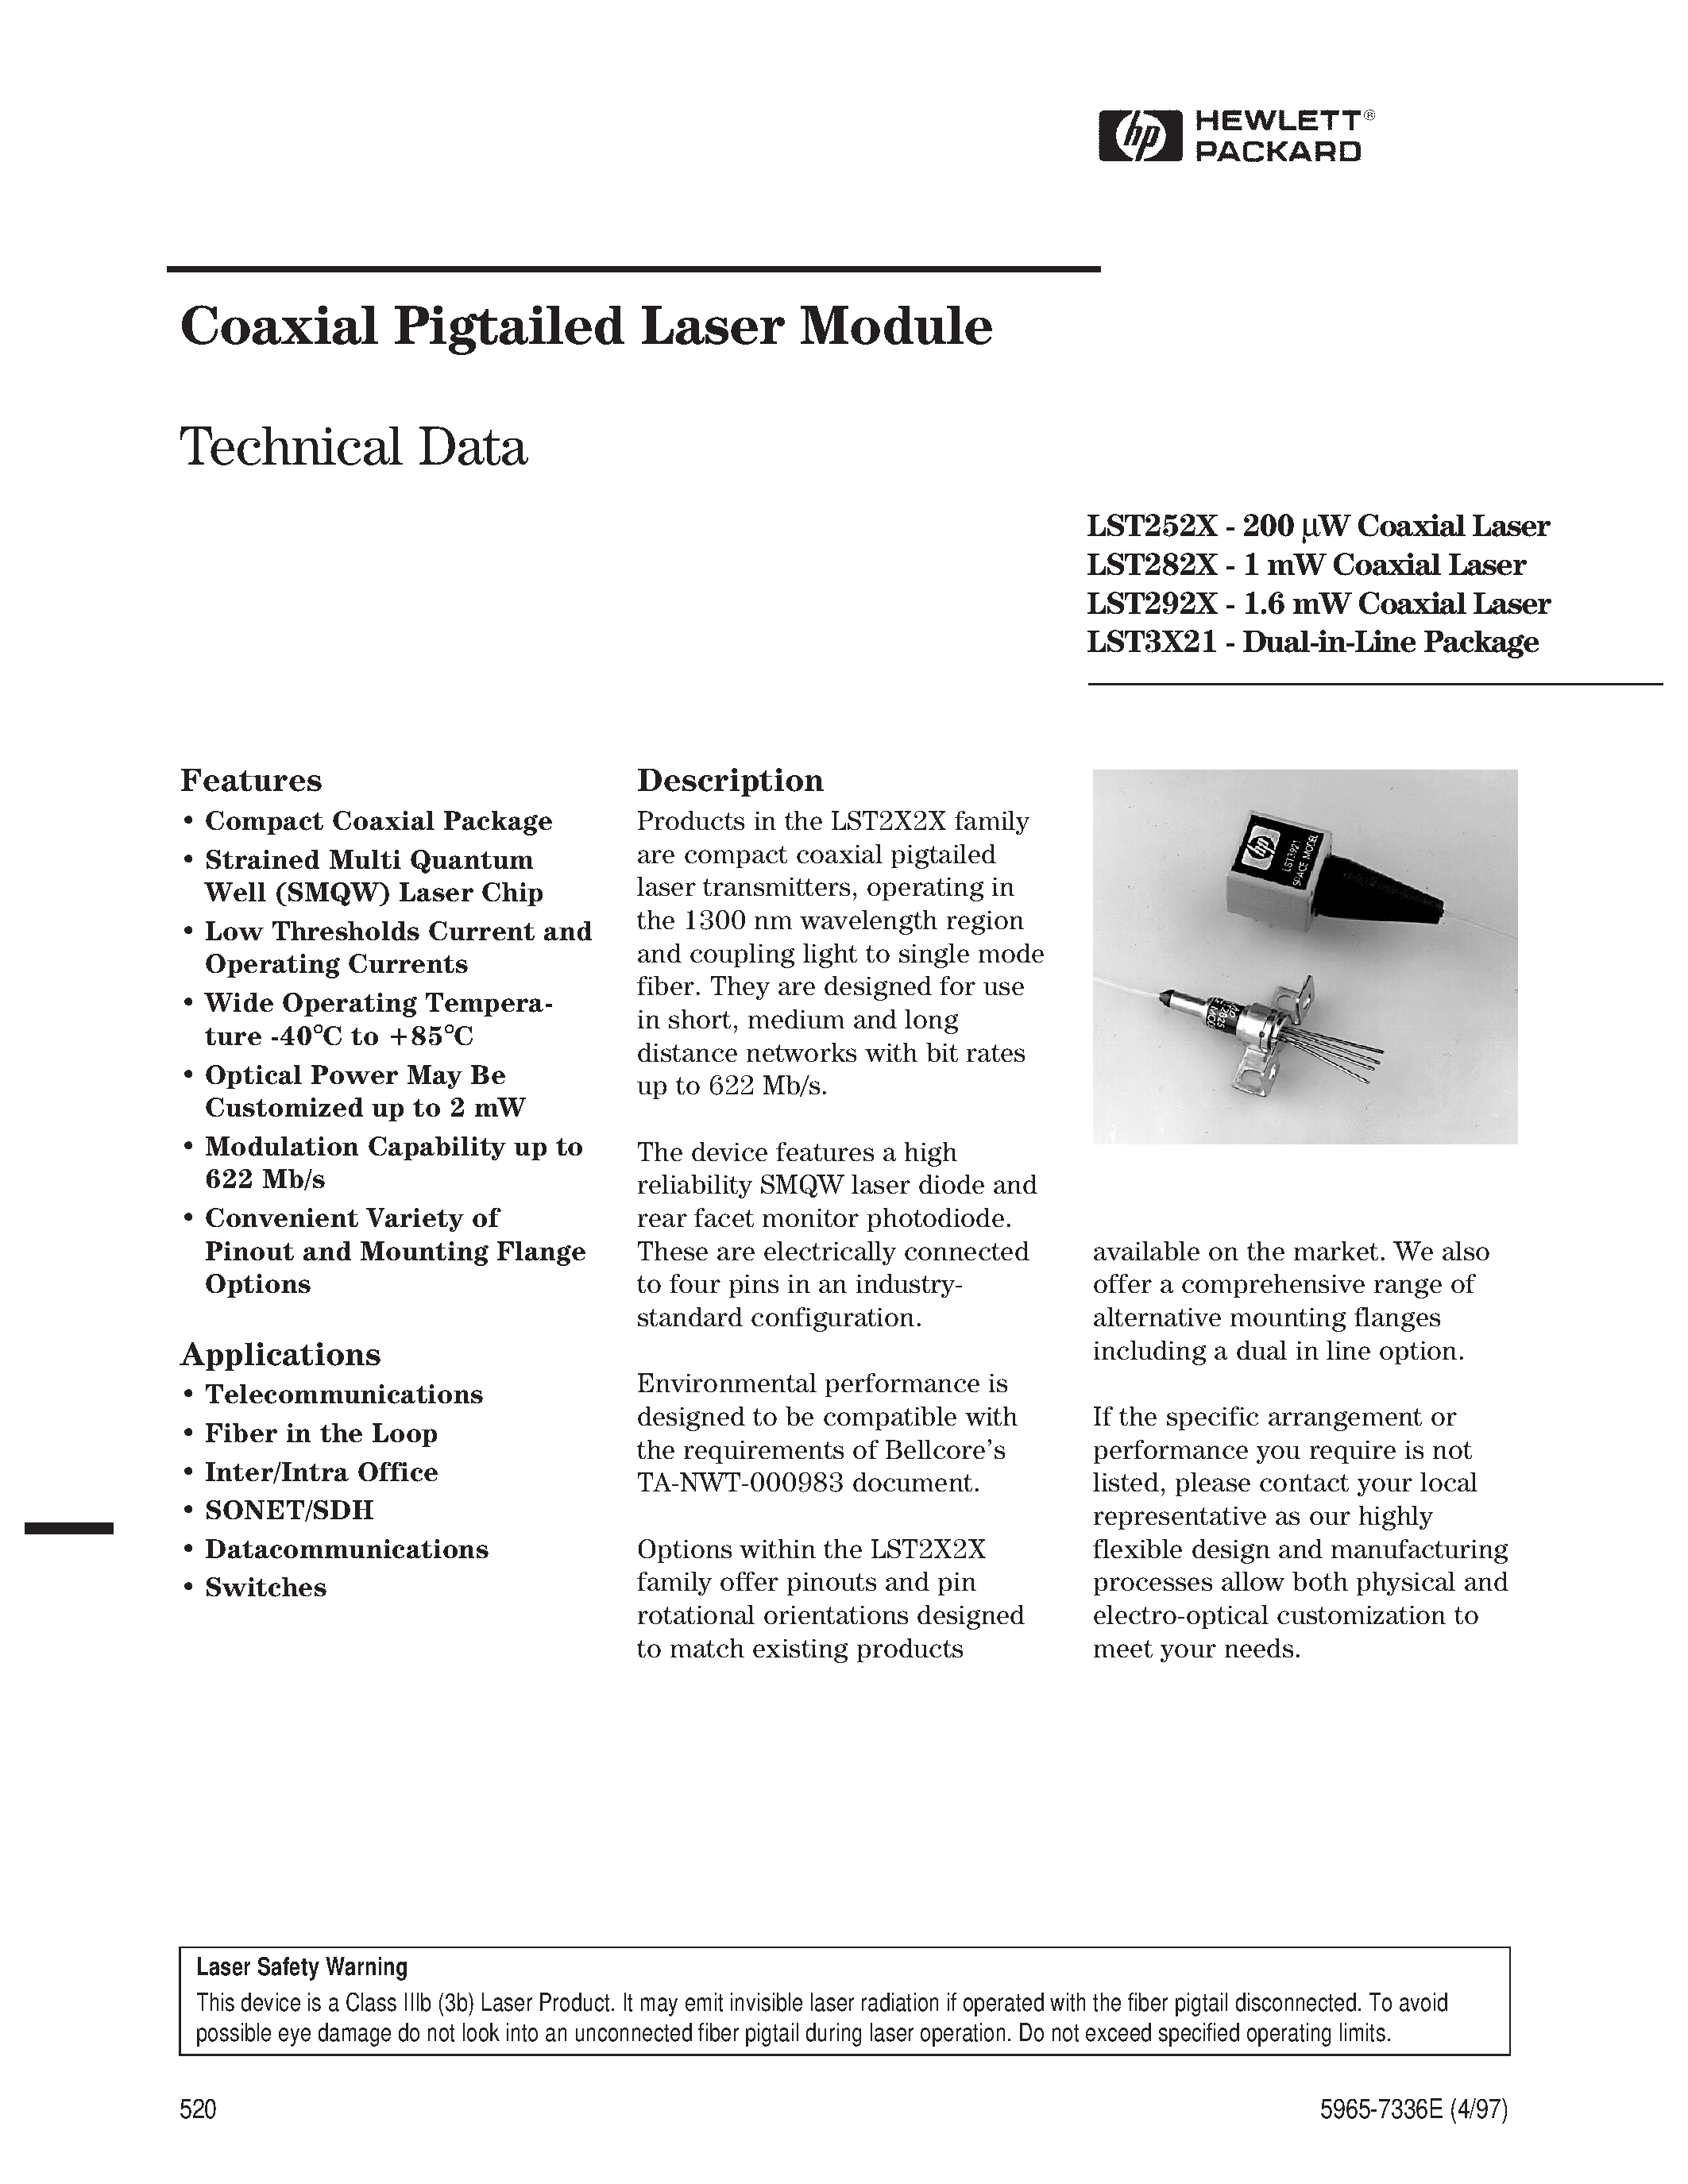 Datasheet LST2925-S4-B-DN - Coaxial Pigtailed Laser Module page 1